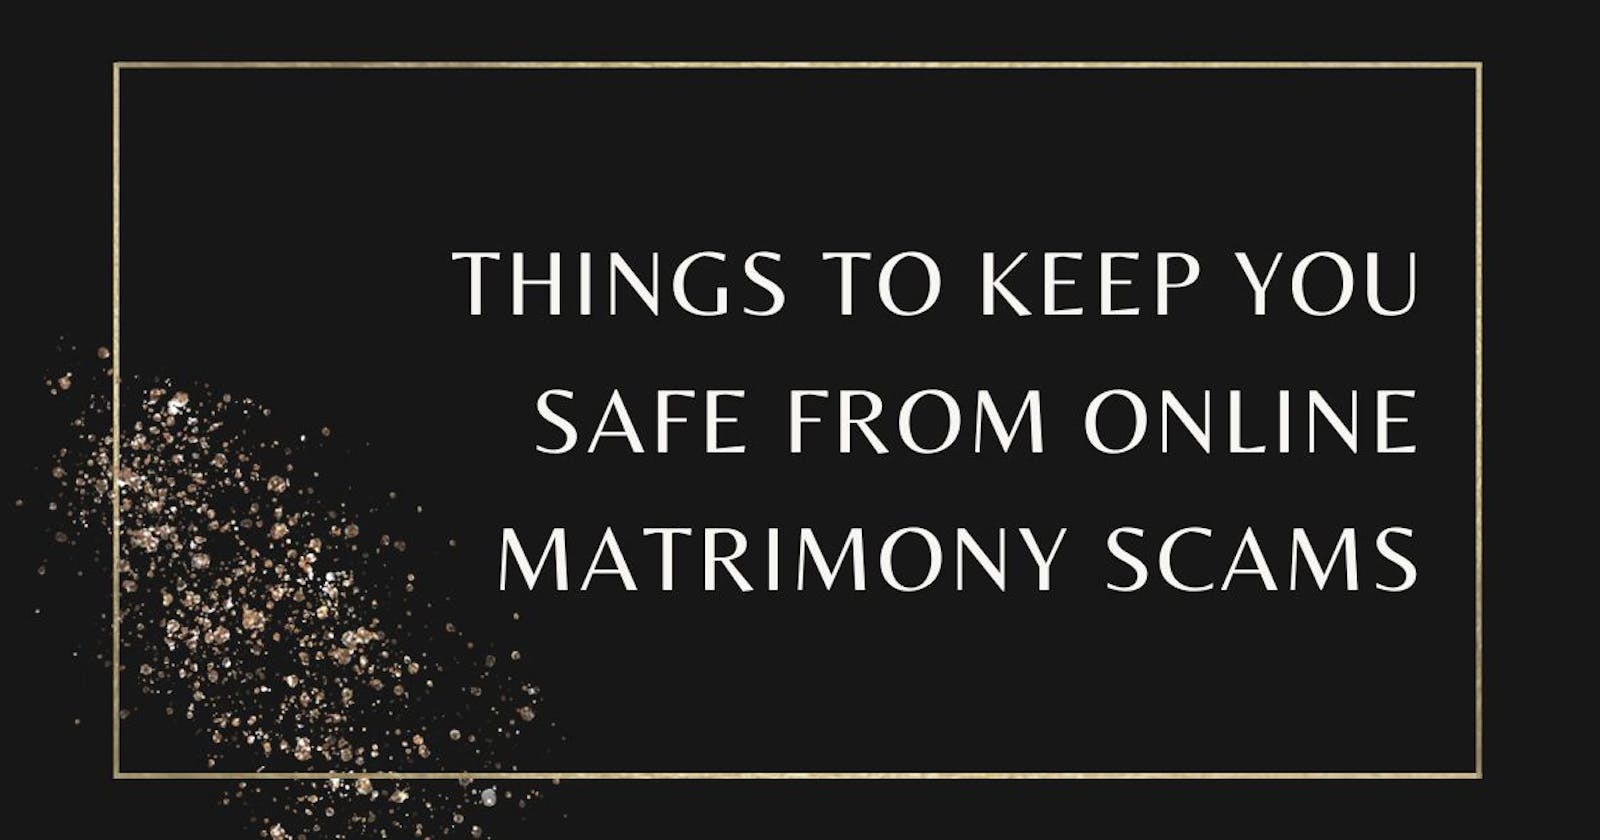 Things to Keep You Safe From Online Matrimony Scams.